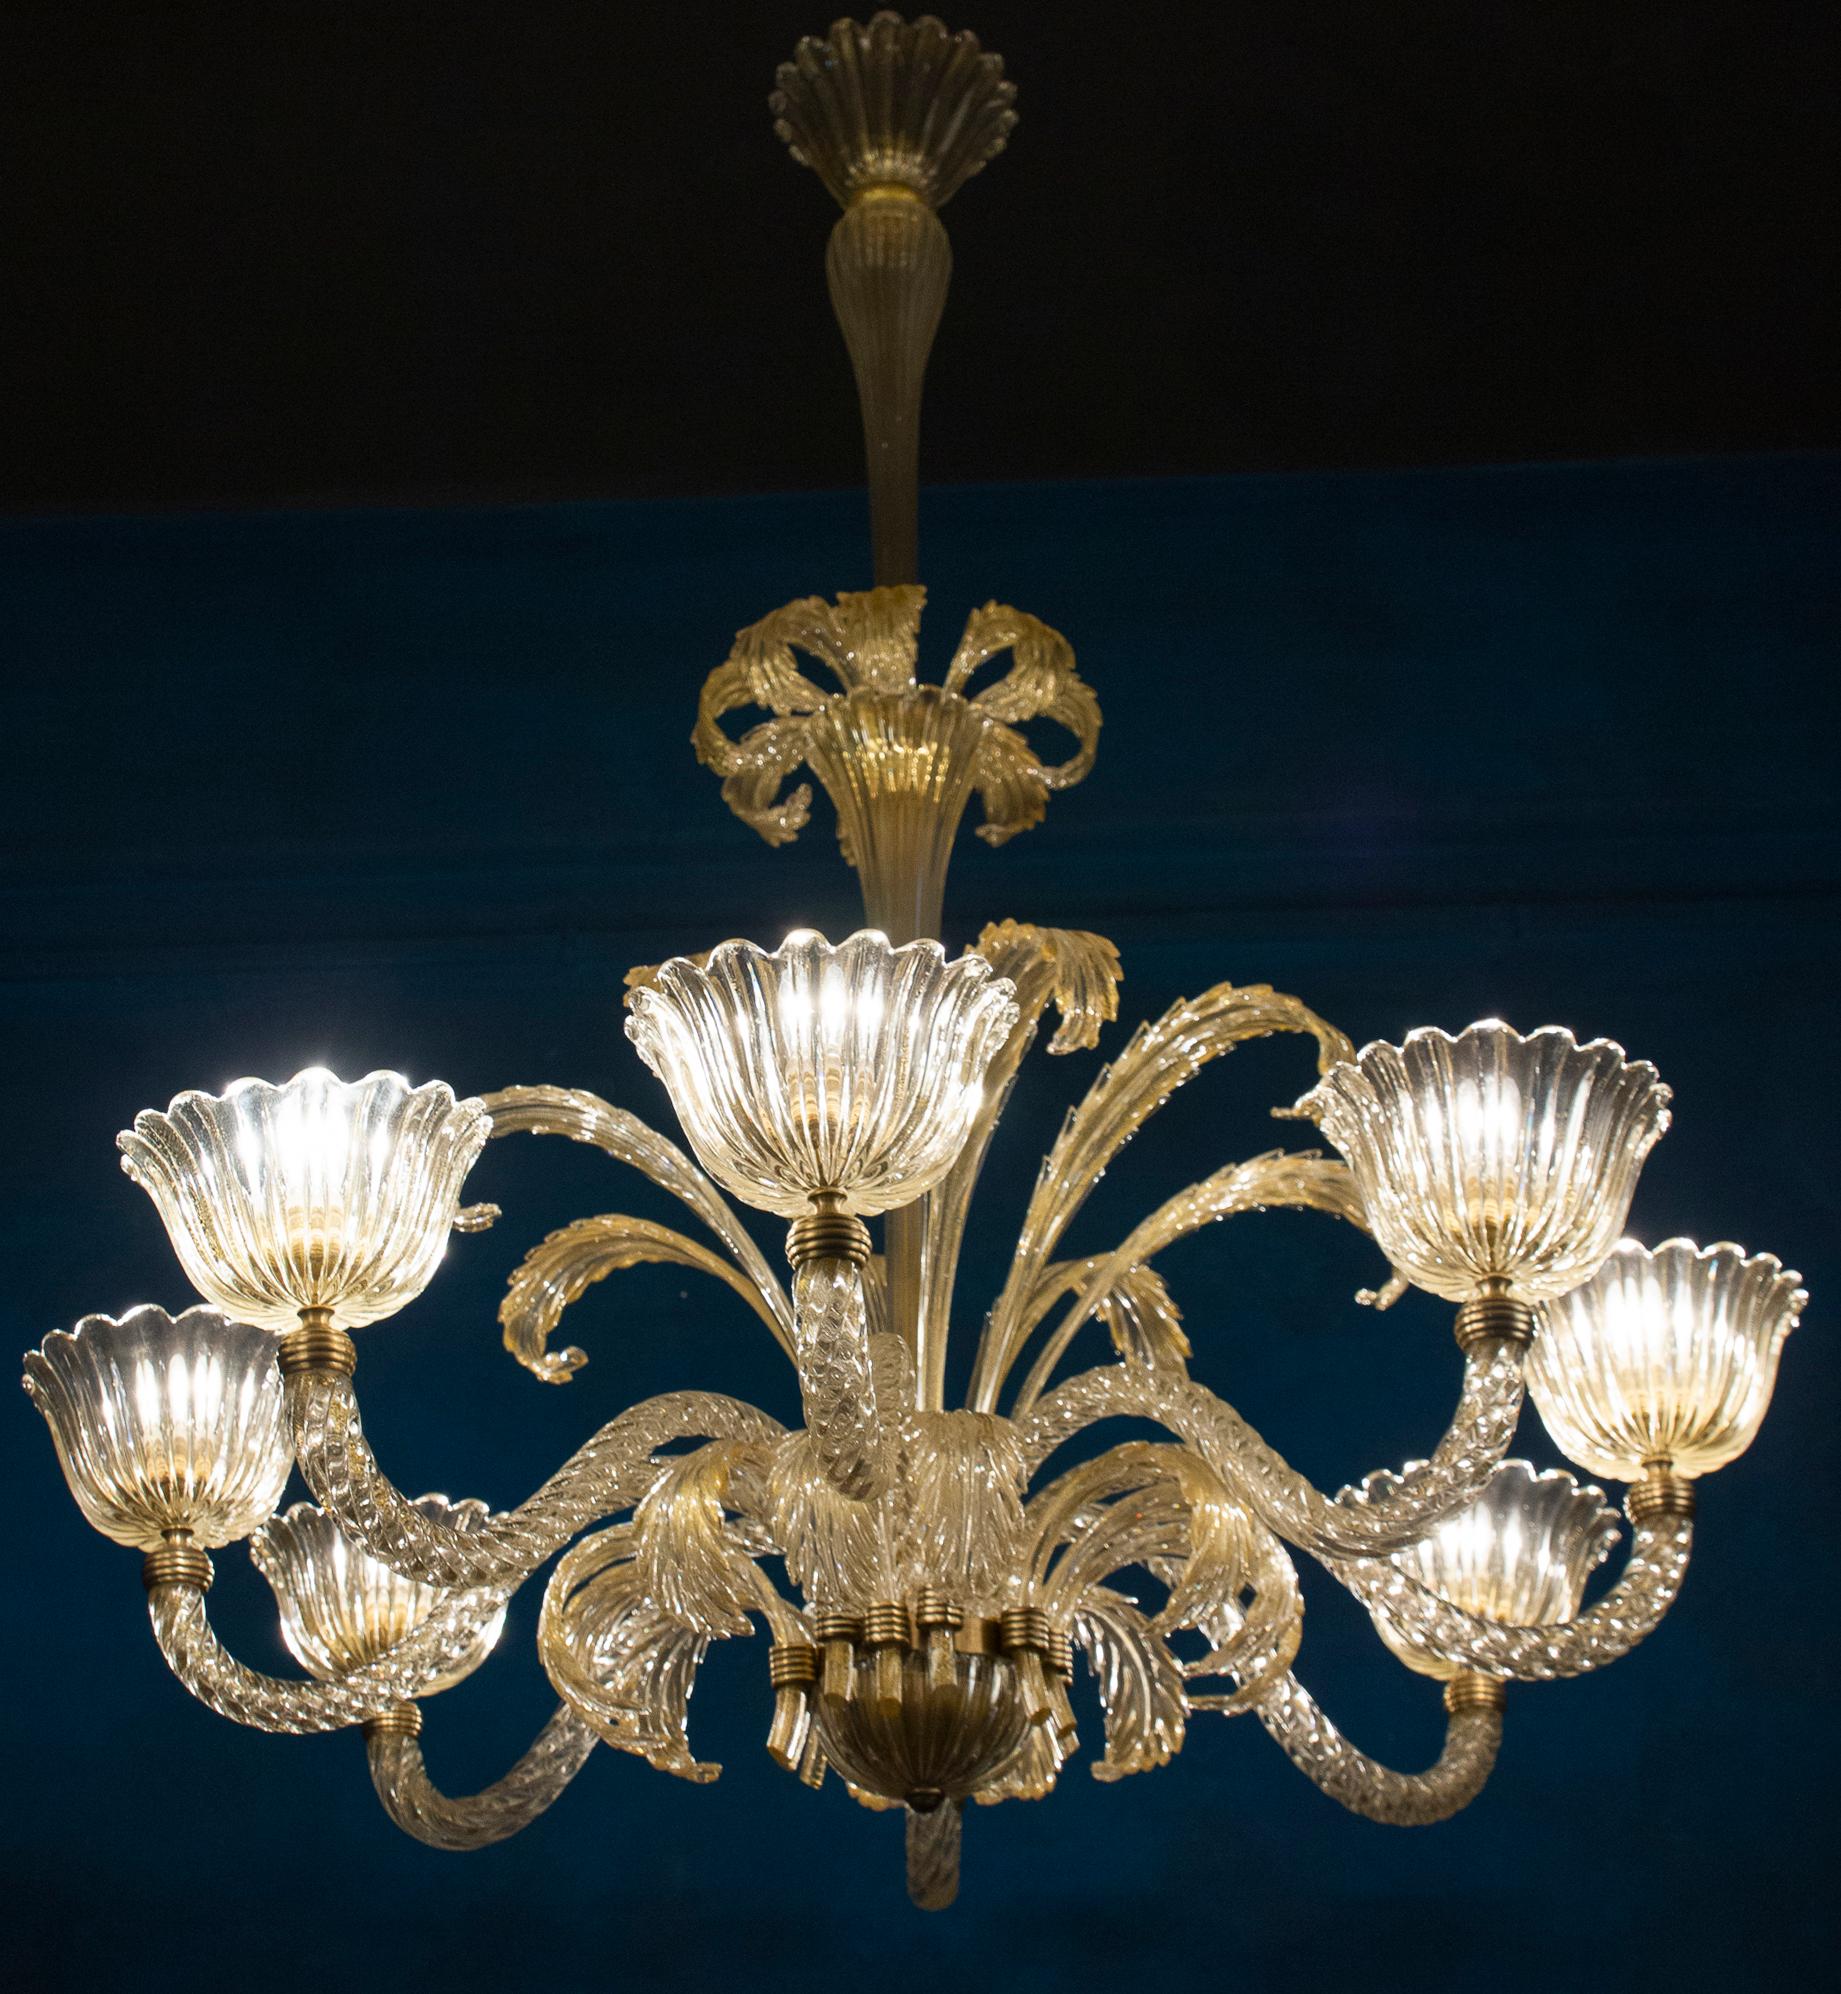 Magnificent Art Deco Mounted Murano Glass Chandelier by Ercole Barovier, 1940 In Excellent Condition For Sale In Rome, IT